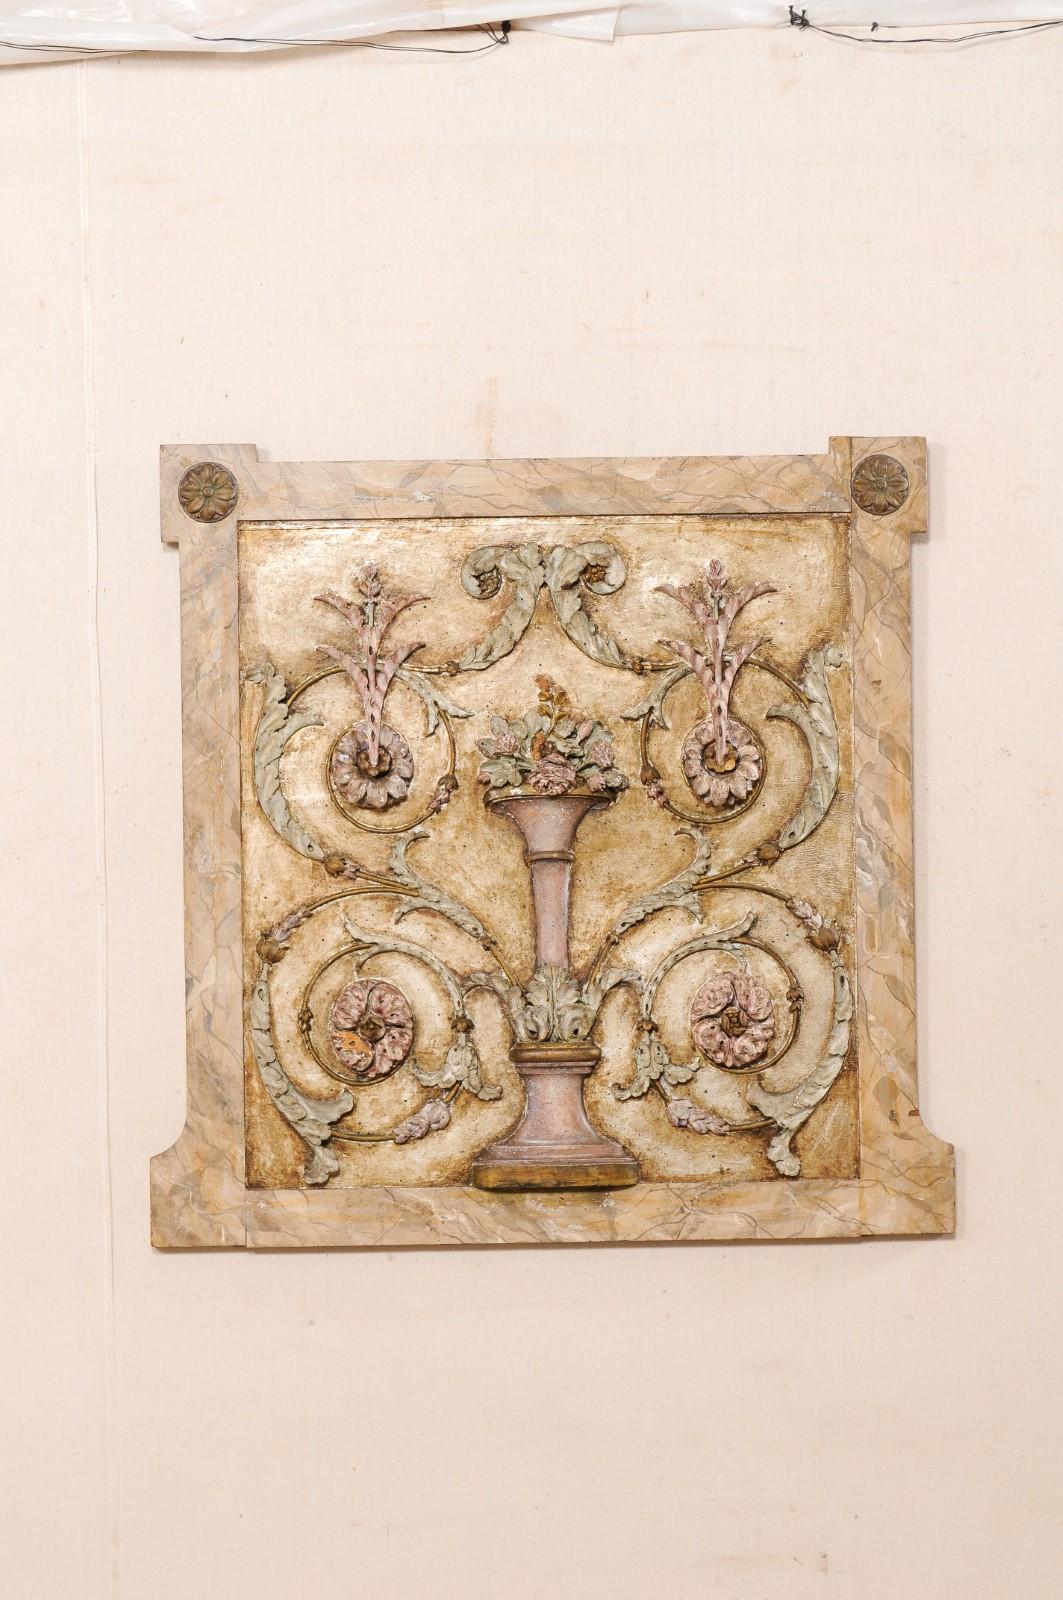 A French carved-wood wall plaque from the early 19th century. This antique wall decoration from France features the Neoclassical stylings of swirling leaves and florals splaying outward from the urn center. All set within a 42